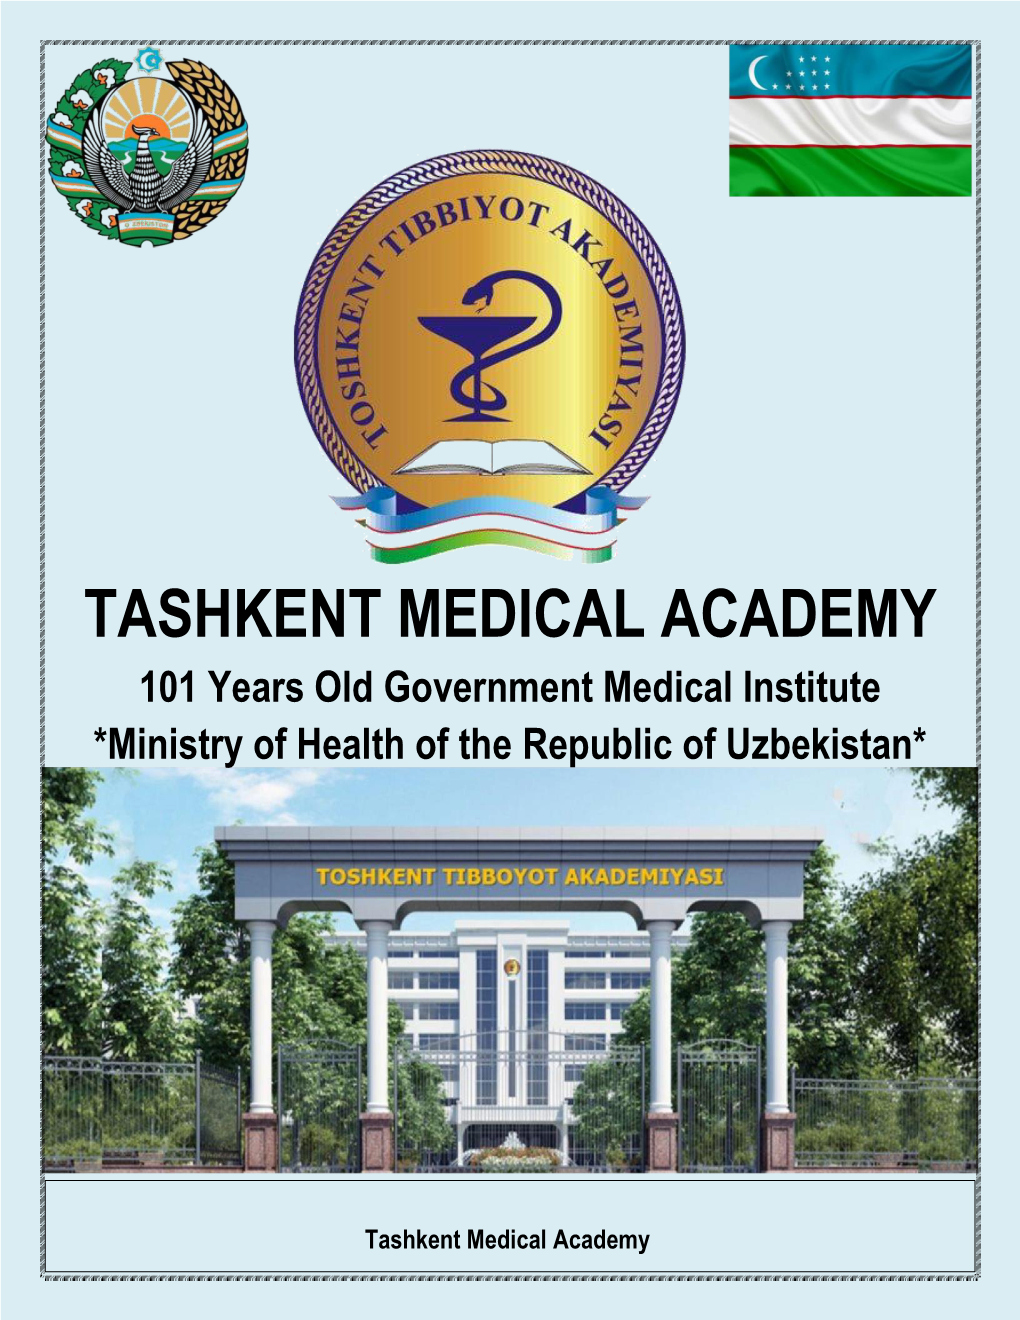 TASHKENT MEDICAL ACADEMY 101 Years Old Government Medical Institute *Ministry of Health of the Republic of Uzbekistan*